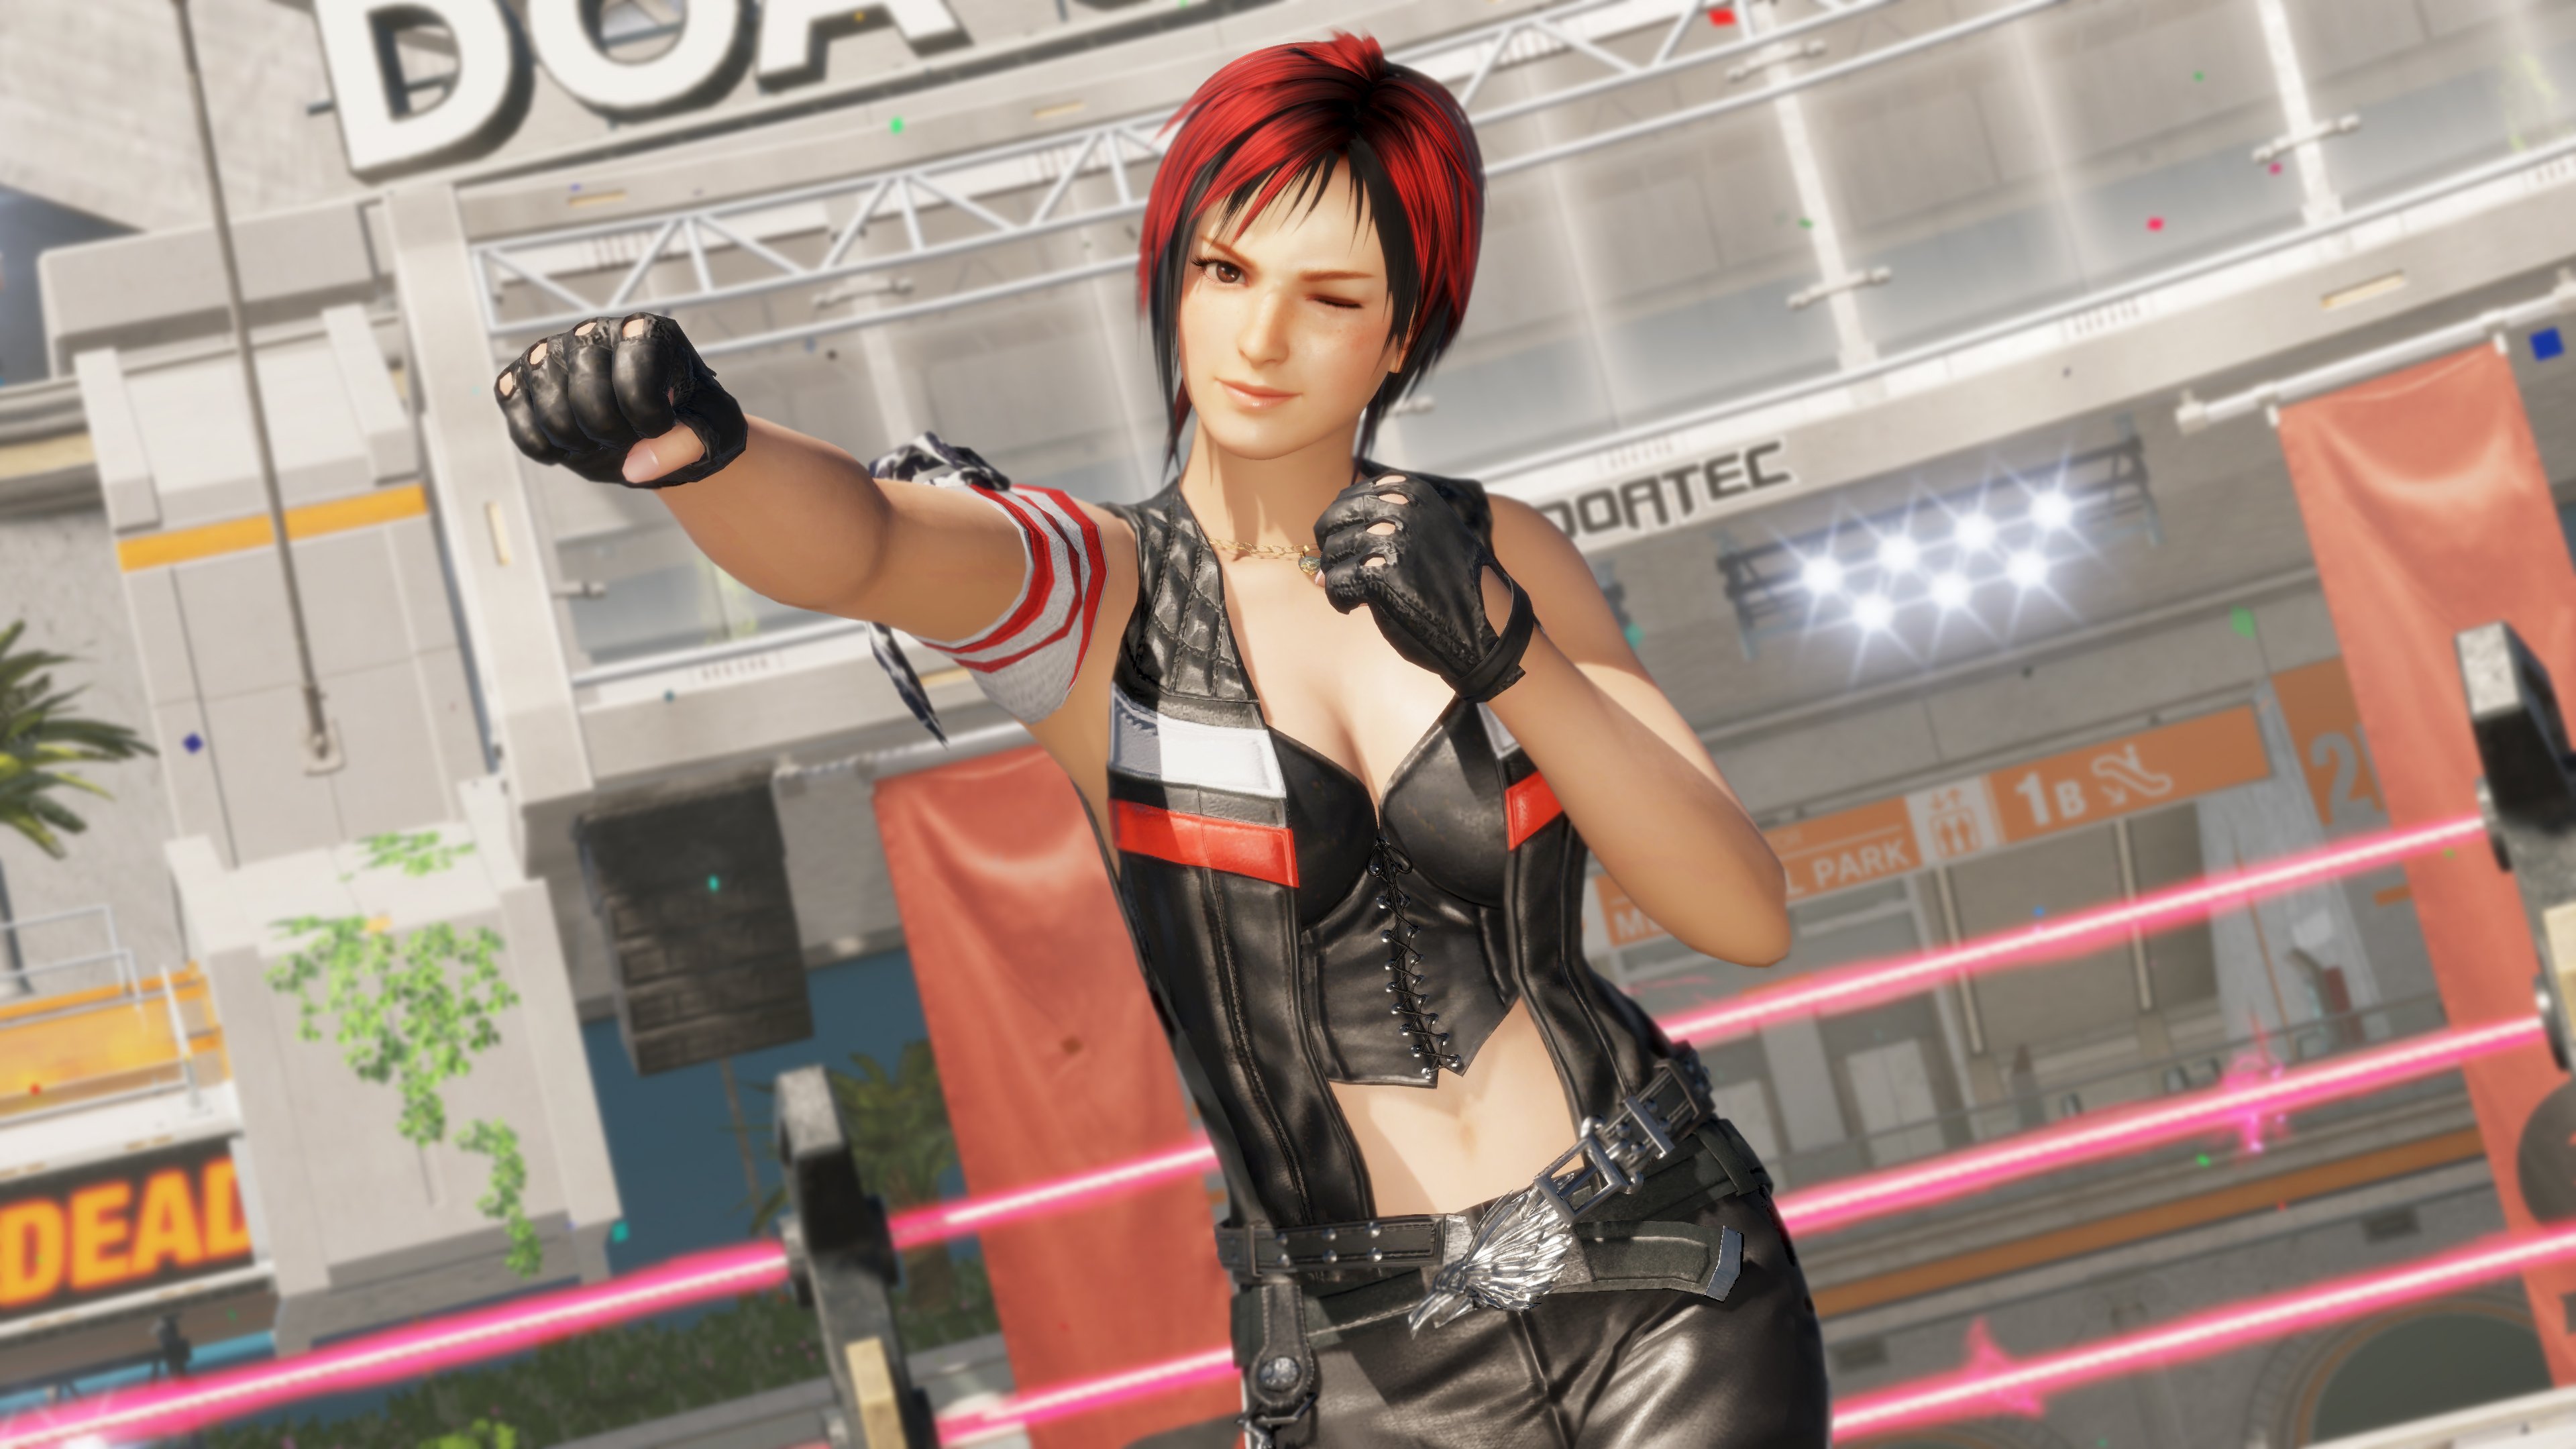 Dead Or Alive 6 Preview - The cast is back in fighting shape, but